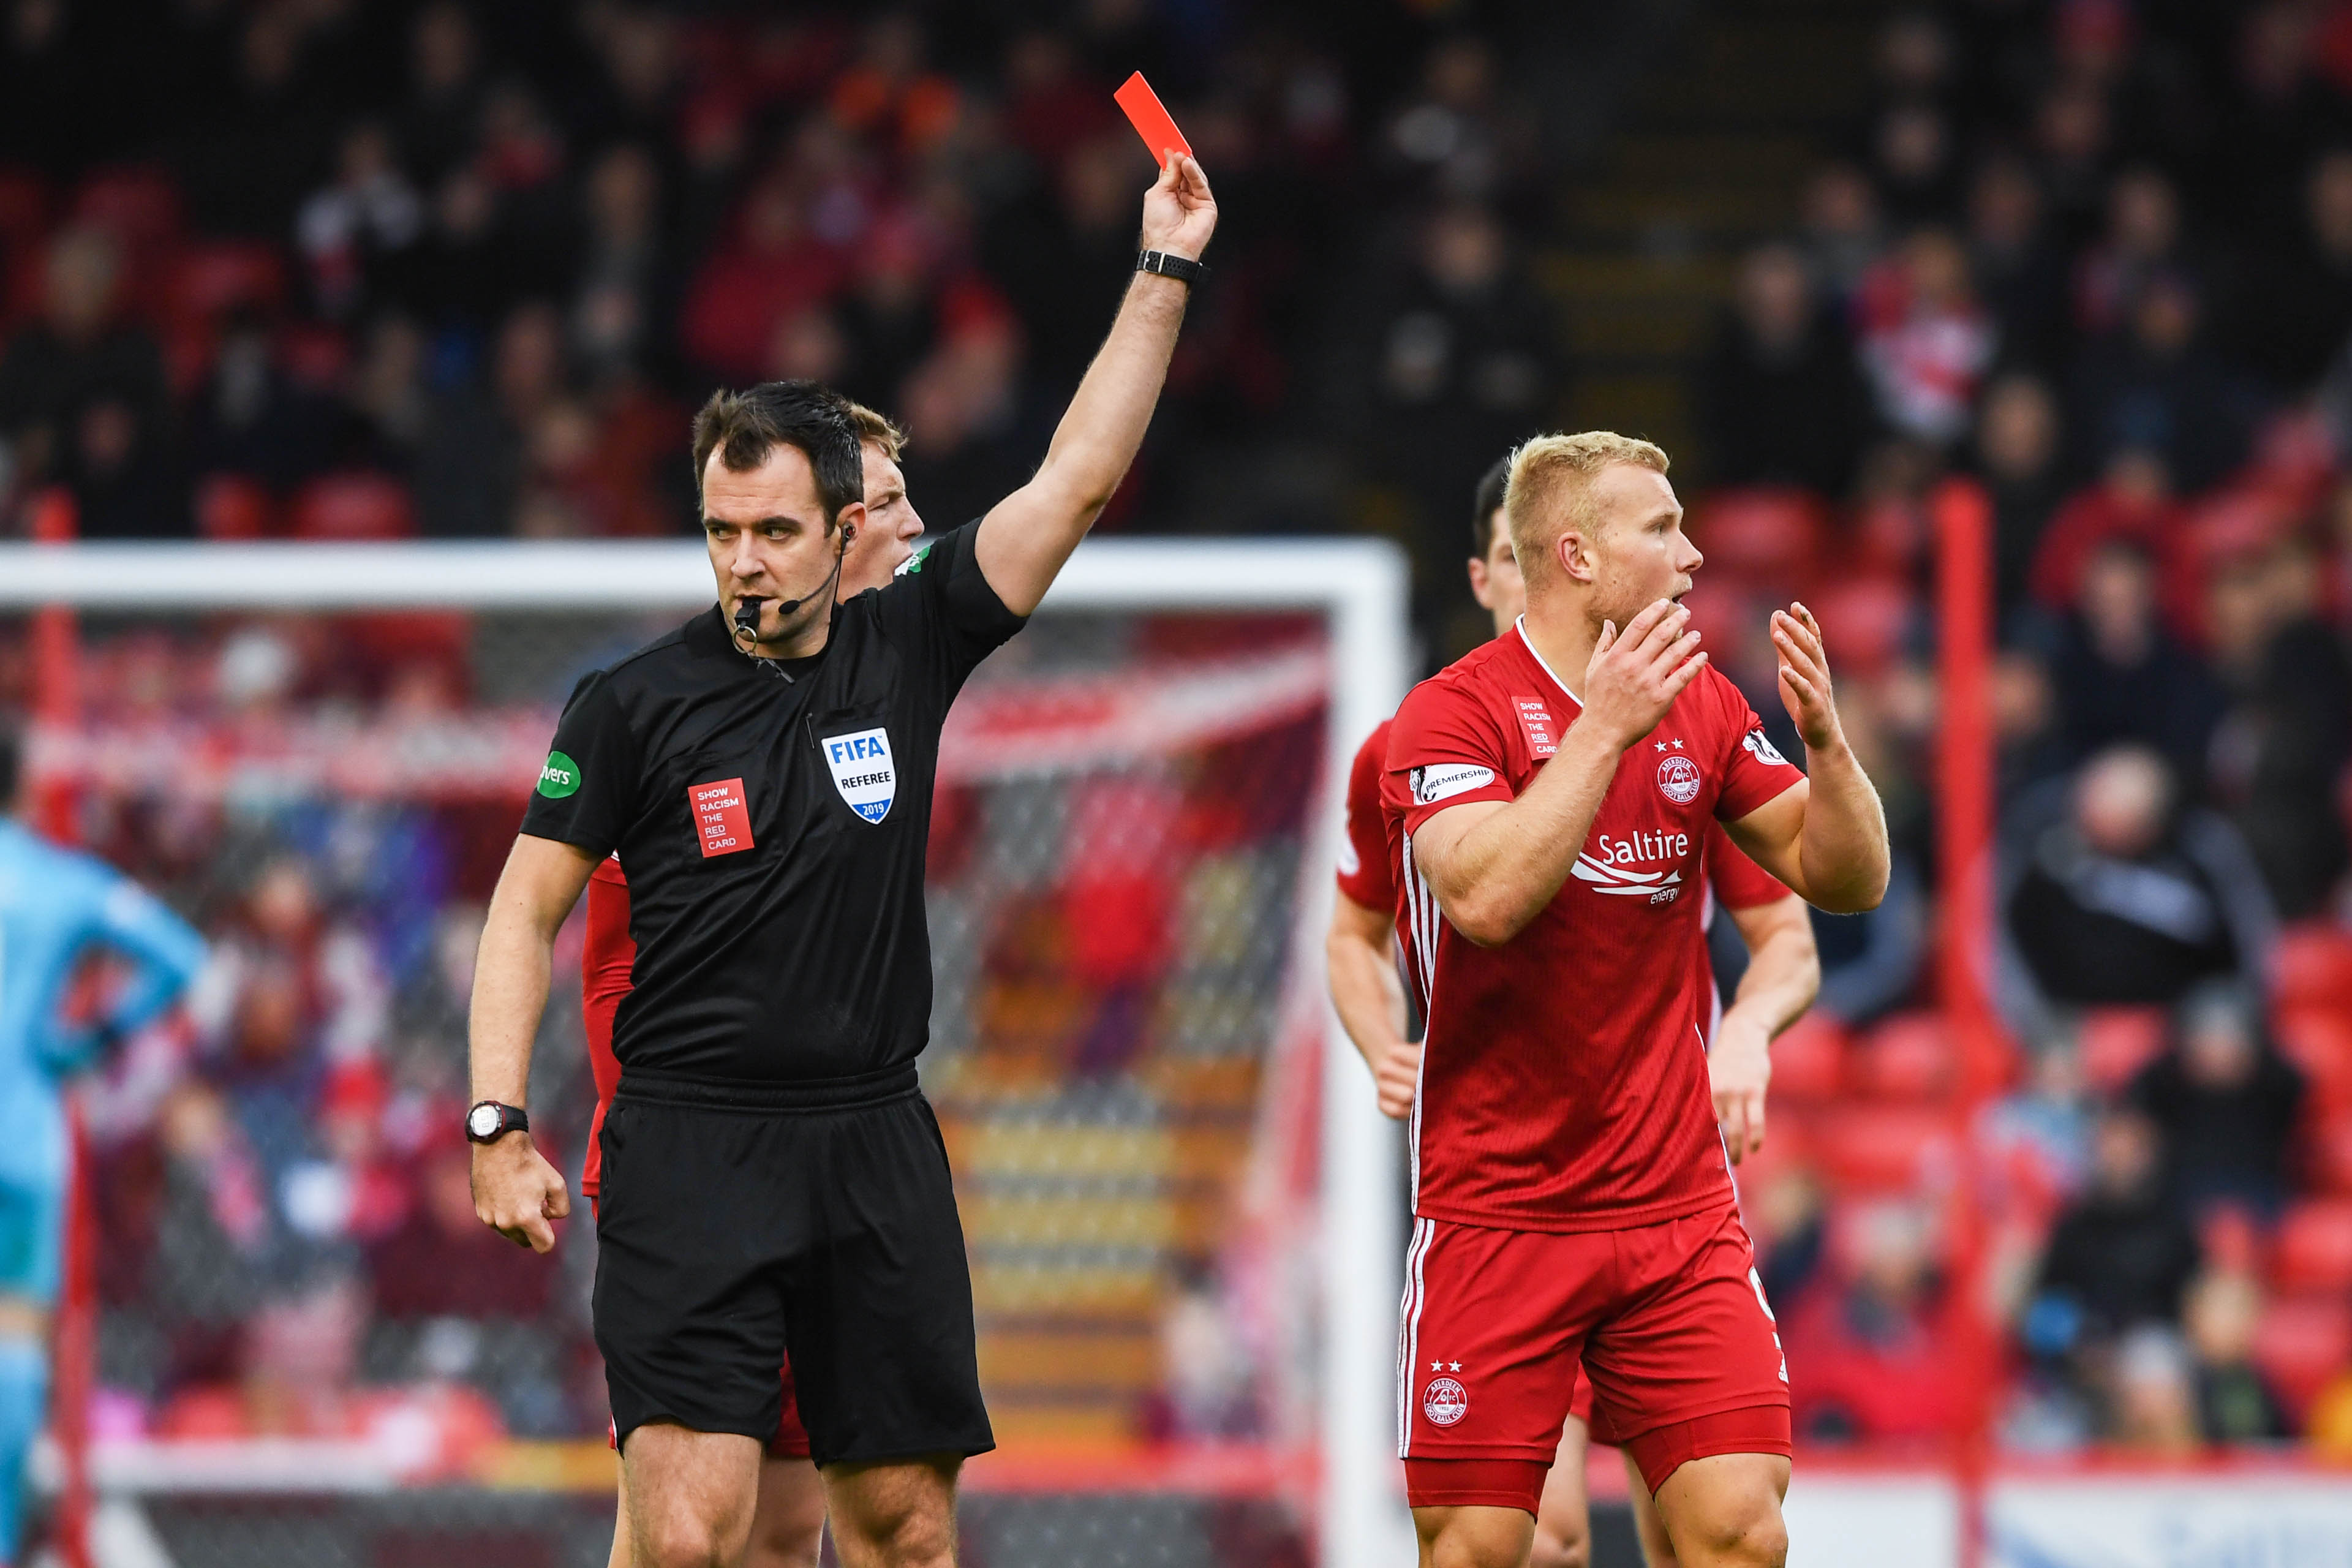 Aberdeen's Curtis Main (R) is sent off by referee Don Robertson during the Ladbrokes Premiership match between Aberdeen and Hibernian